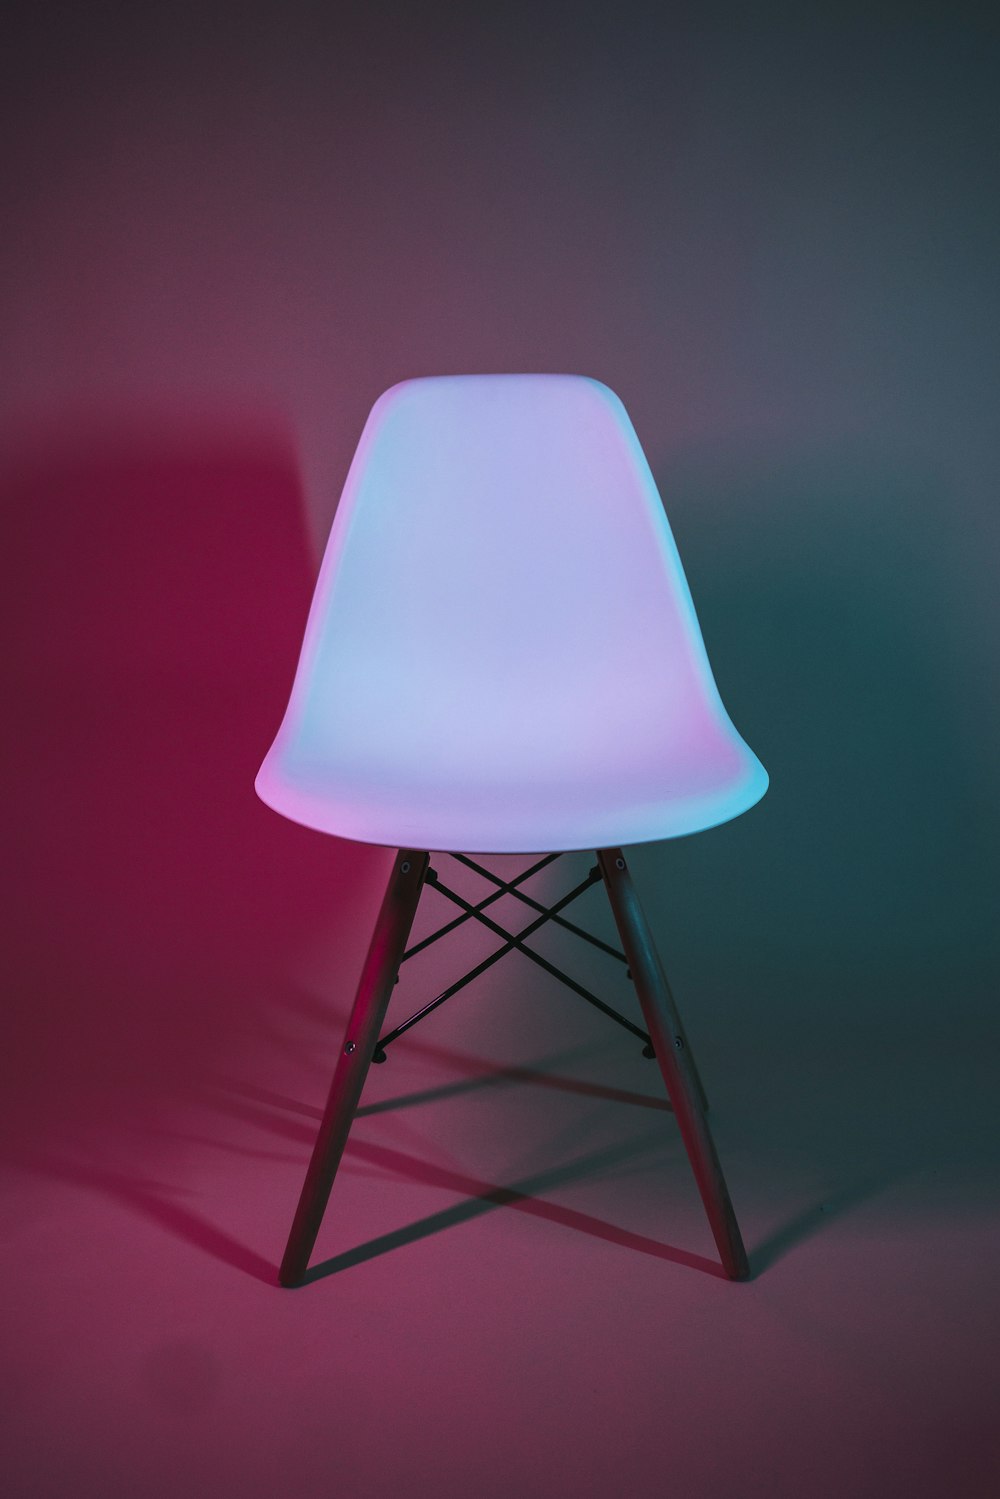 a white chair with a pink light on it